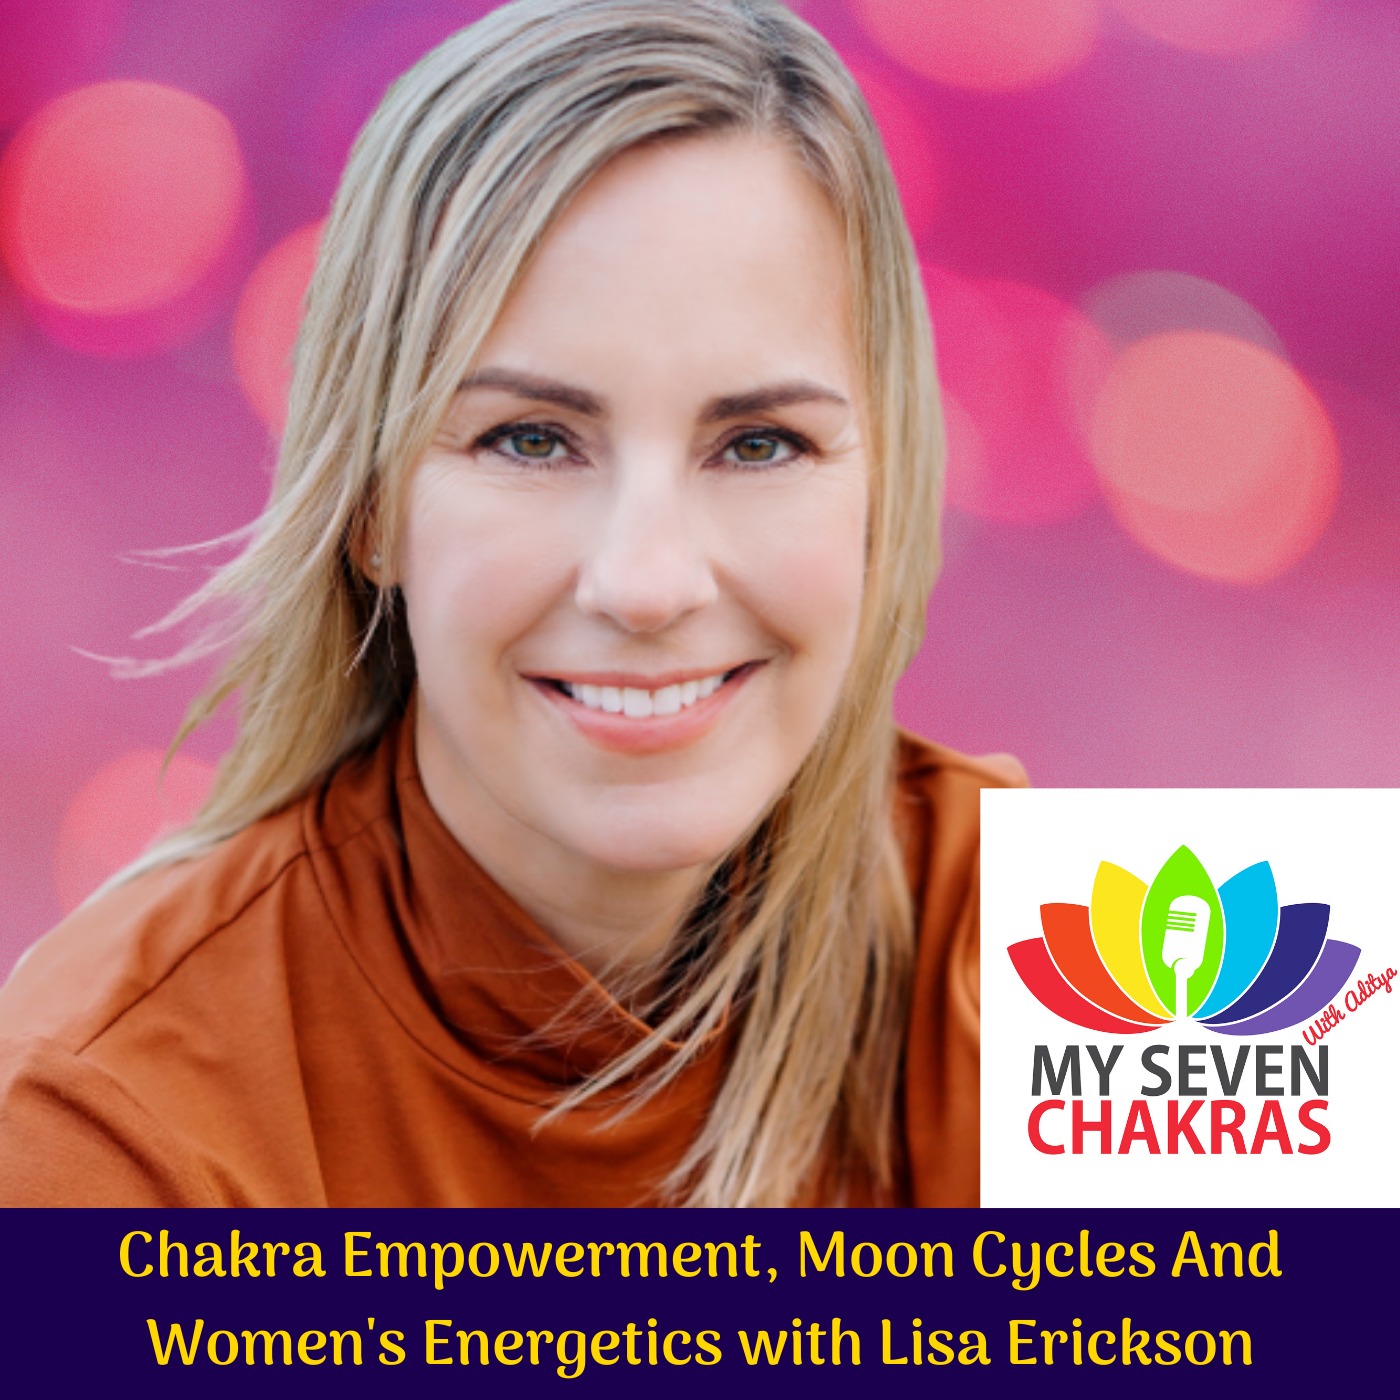 Chakra Empowerment, Moon Cycles And Women's Energetics With Lisa Erickson